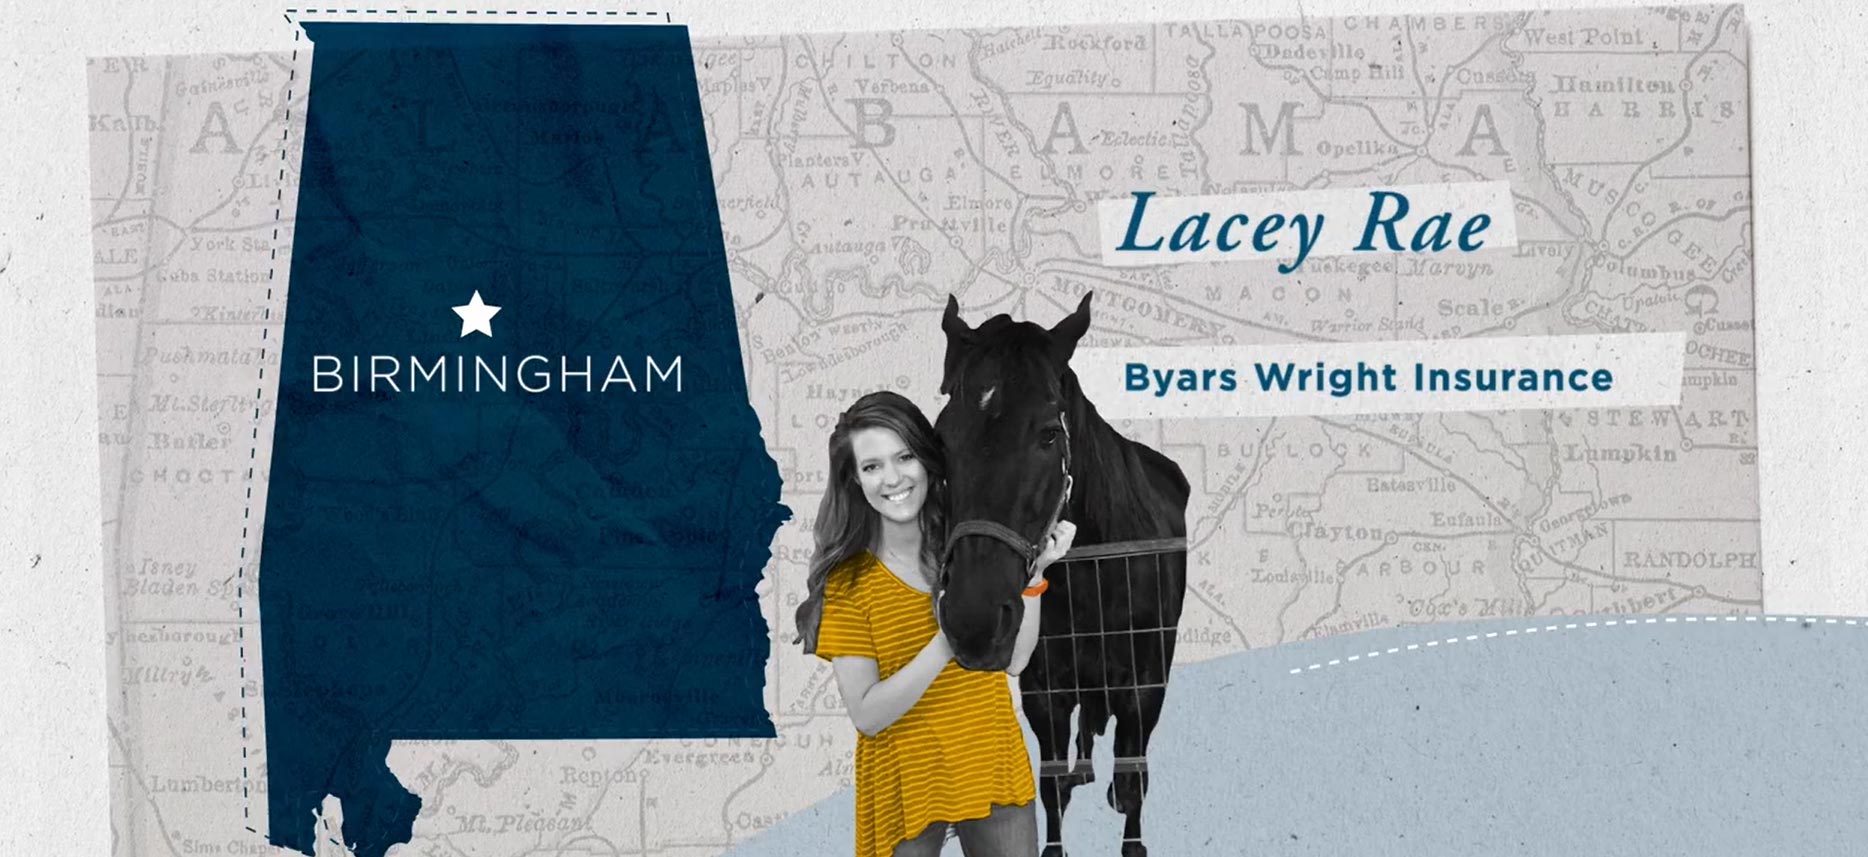 Lacey Rae from Byars-Wright Insurance